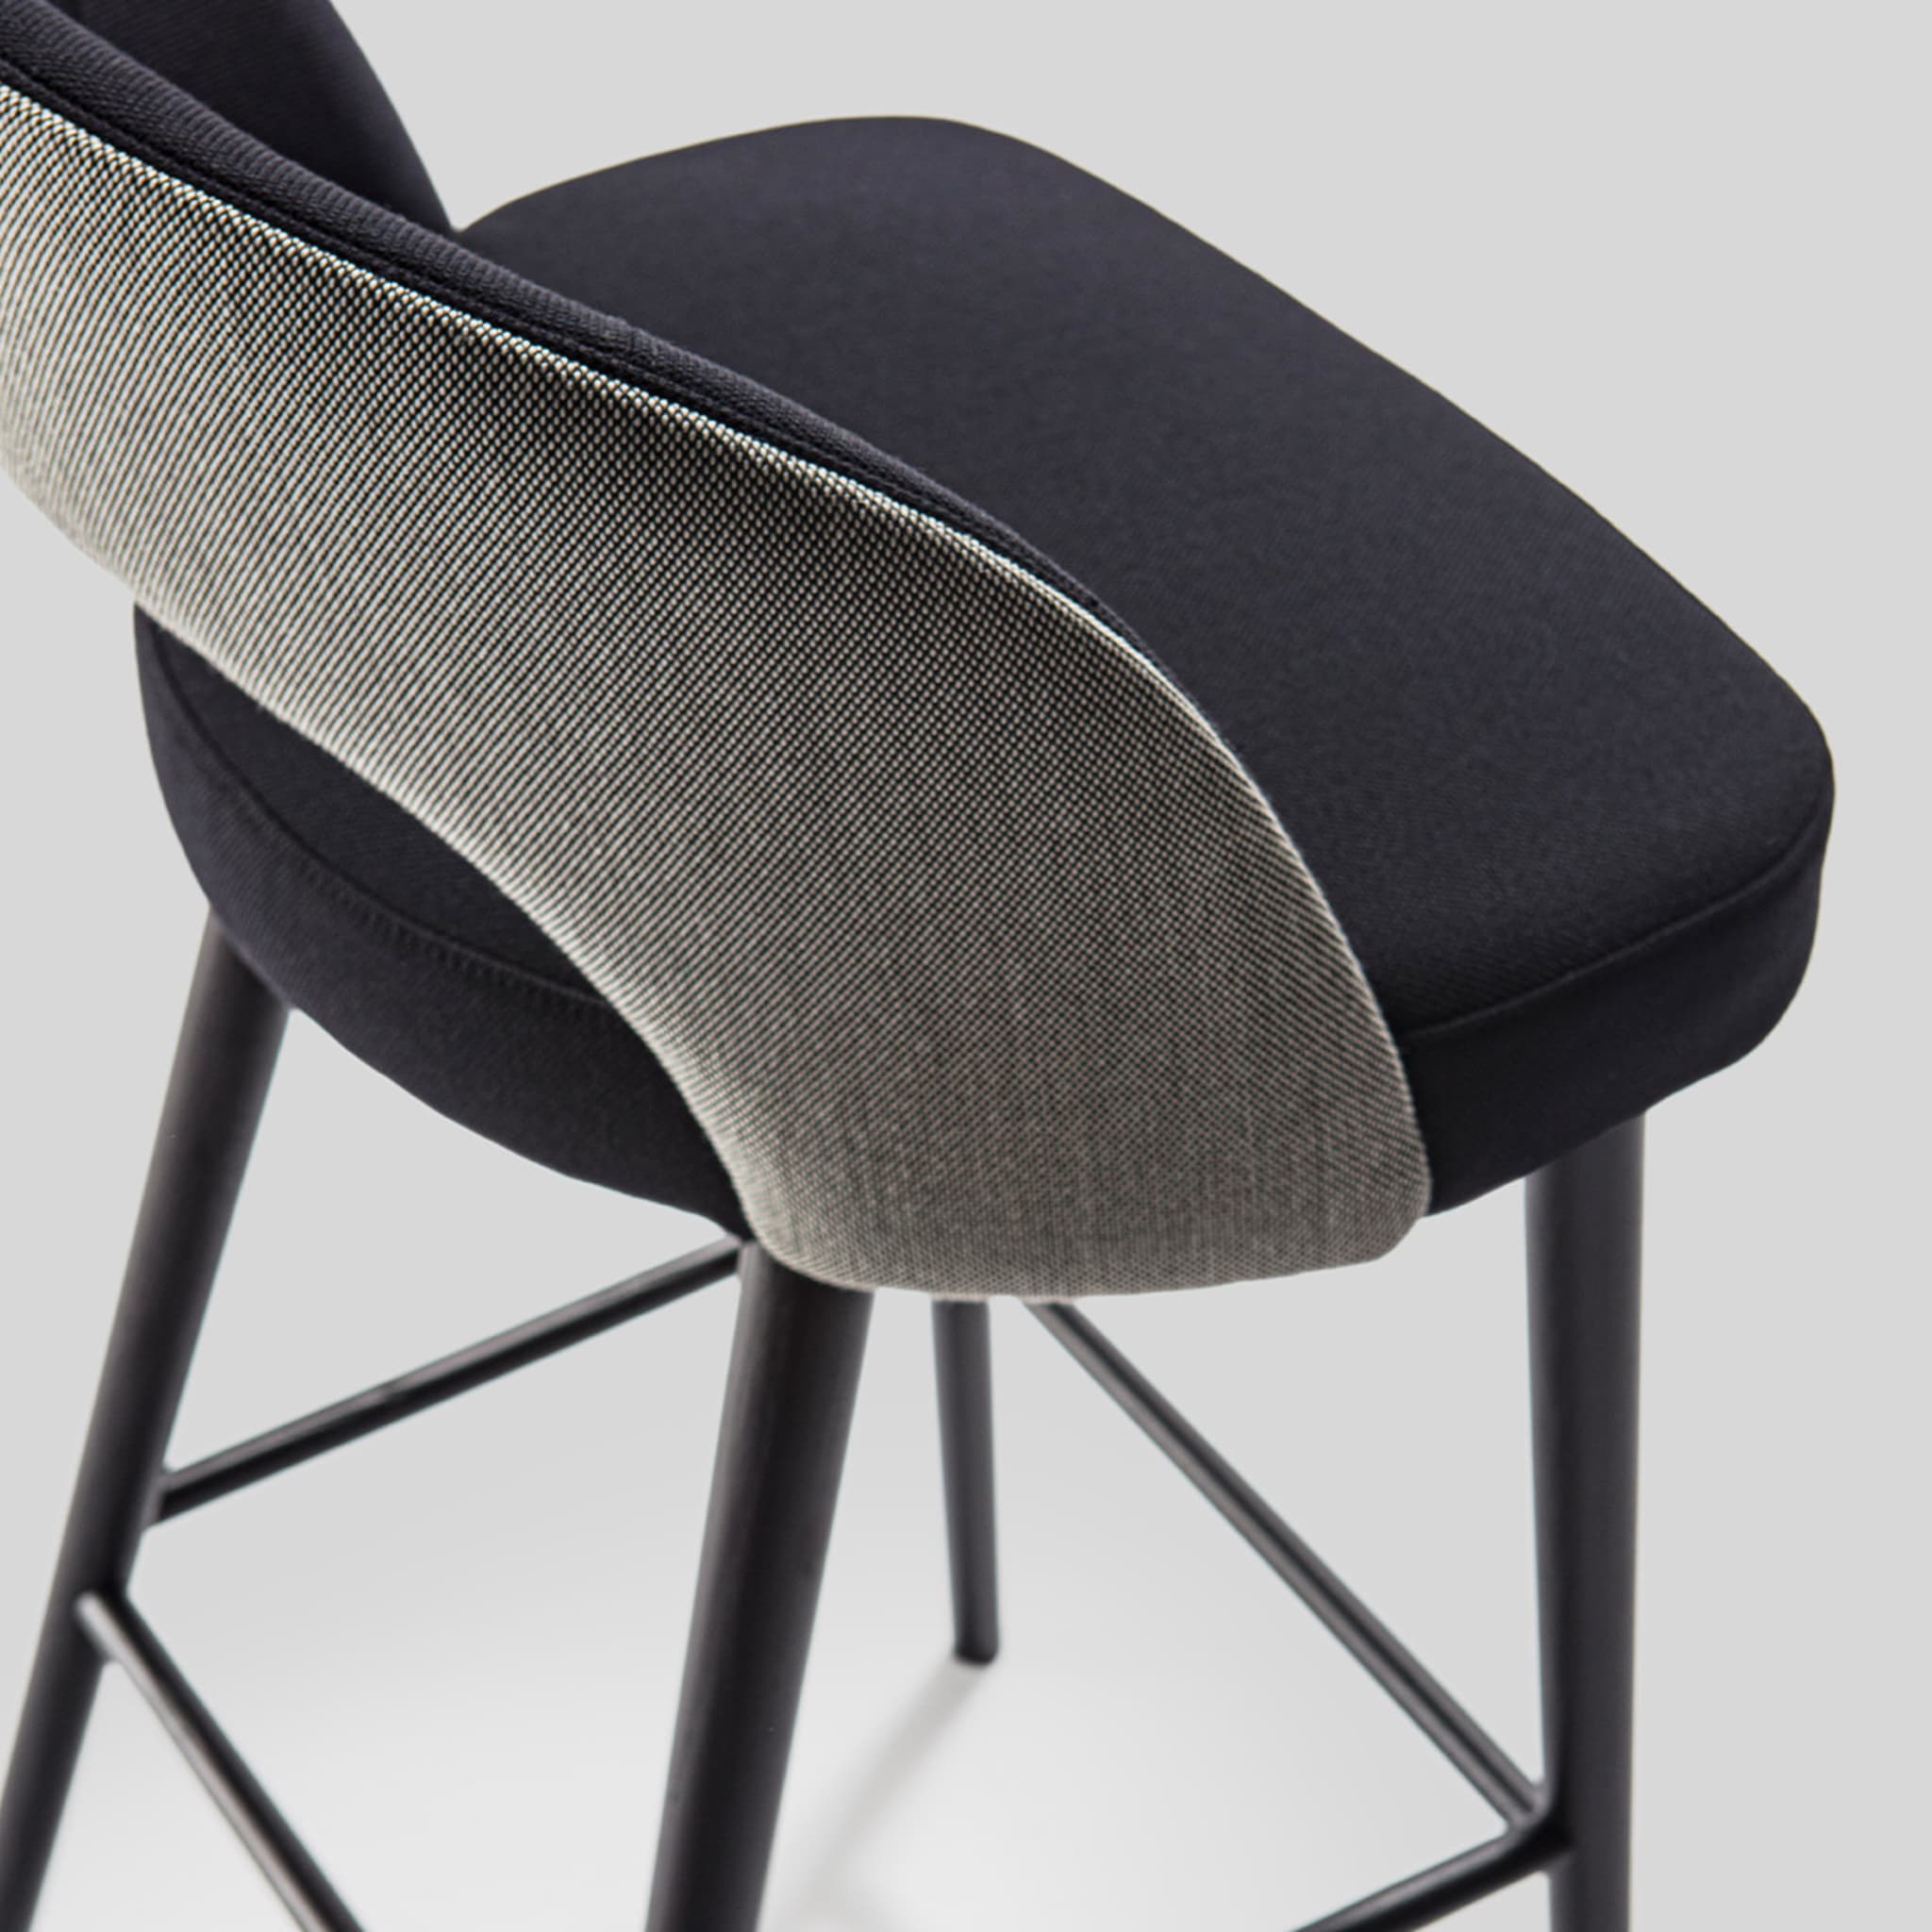 Ring 2-Tone Gray Dining Chair - Alternative view 1